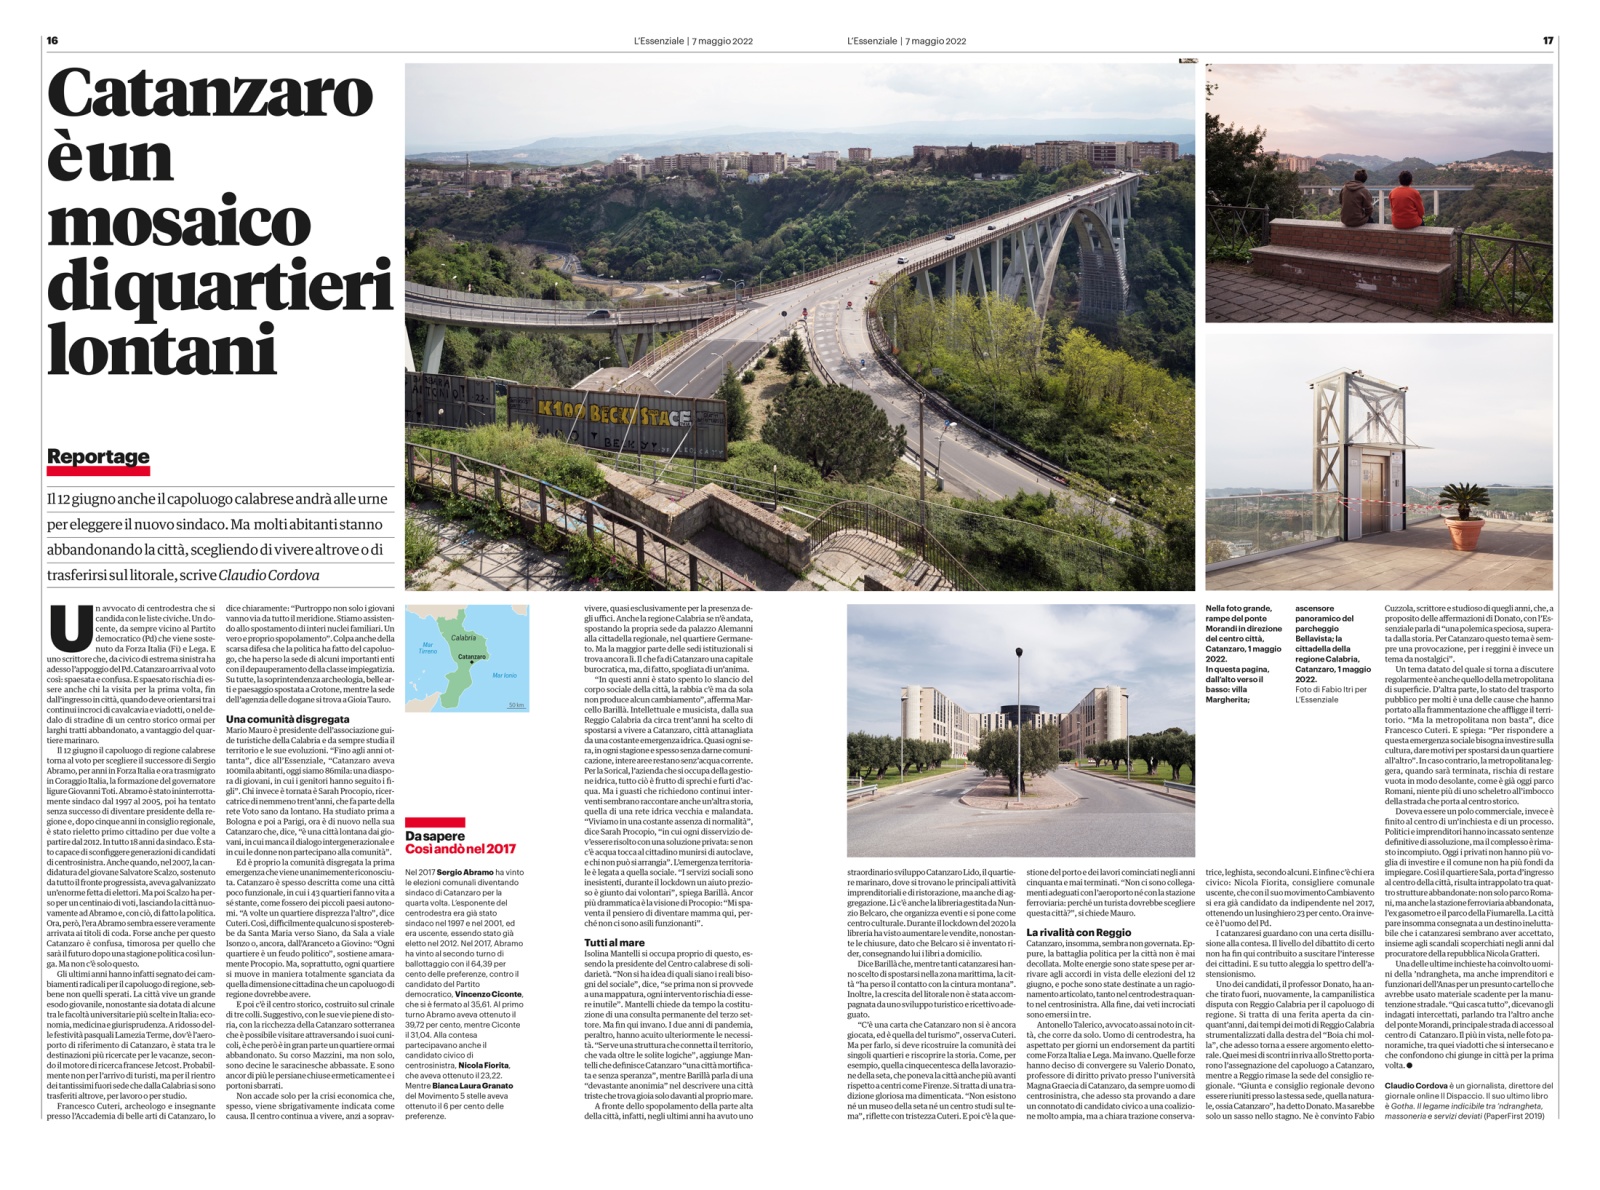 On assignment for L'Essenziale magazine - 07.05.2022